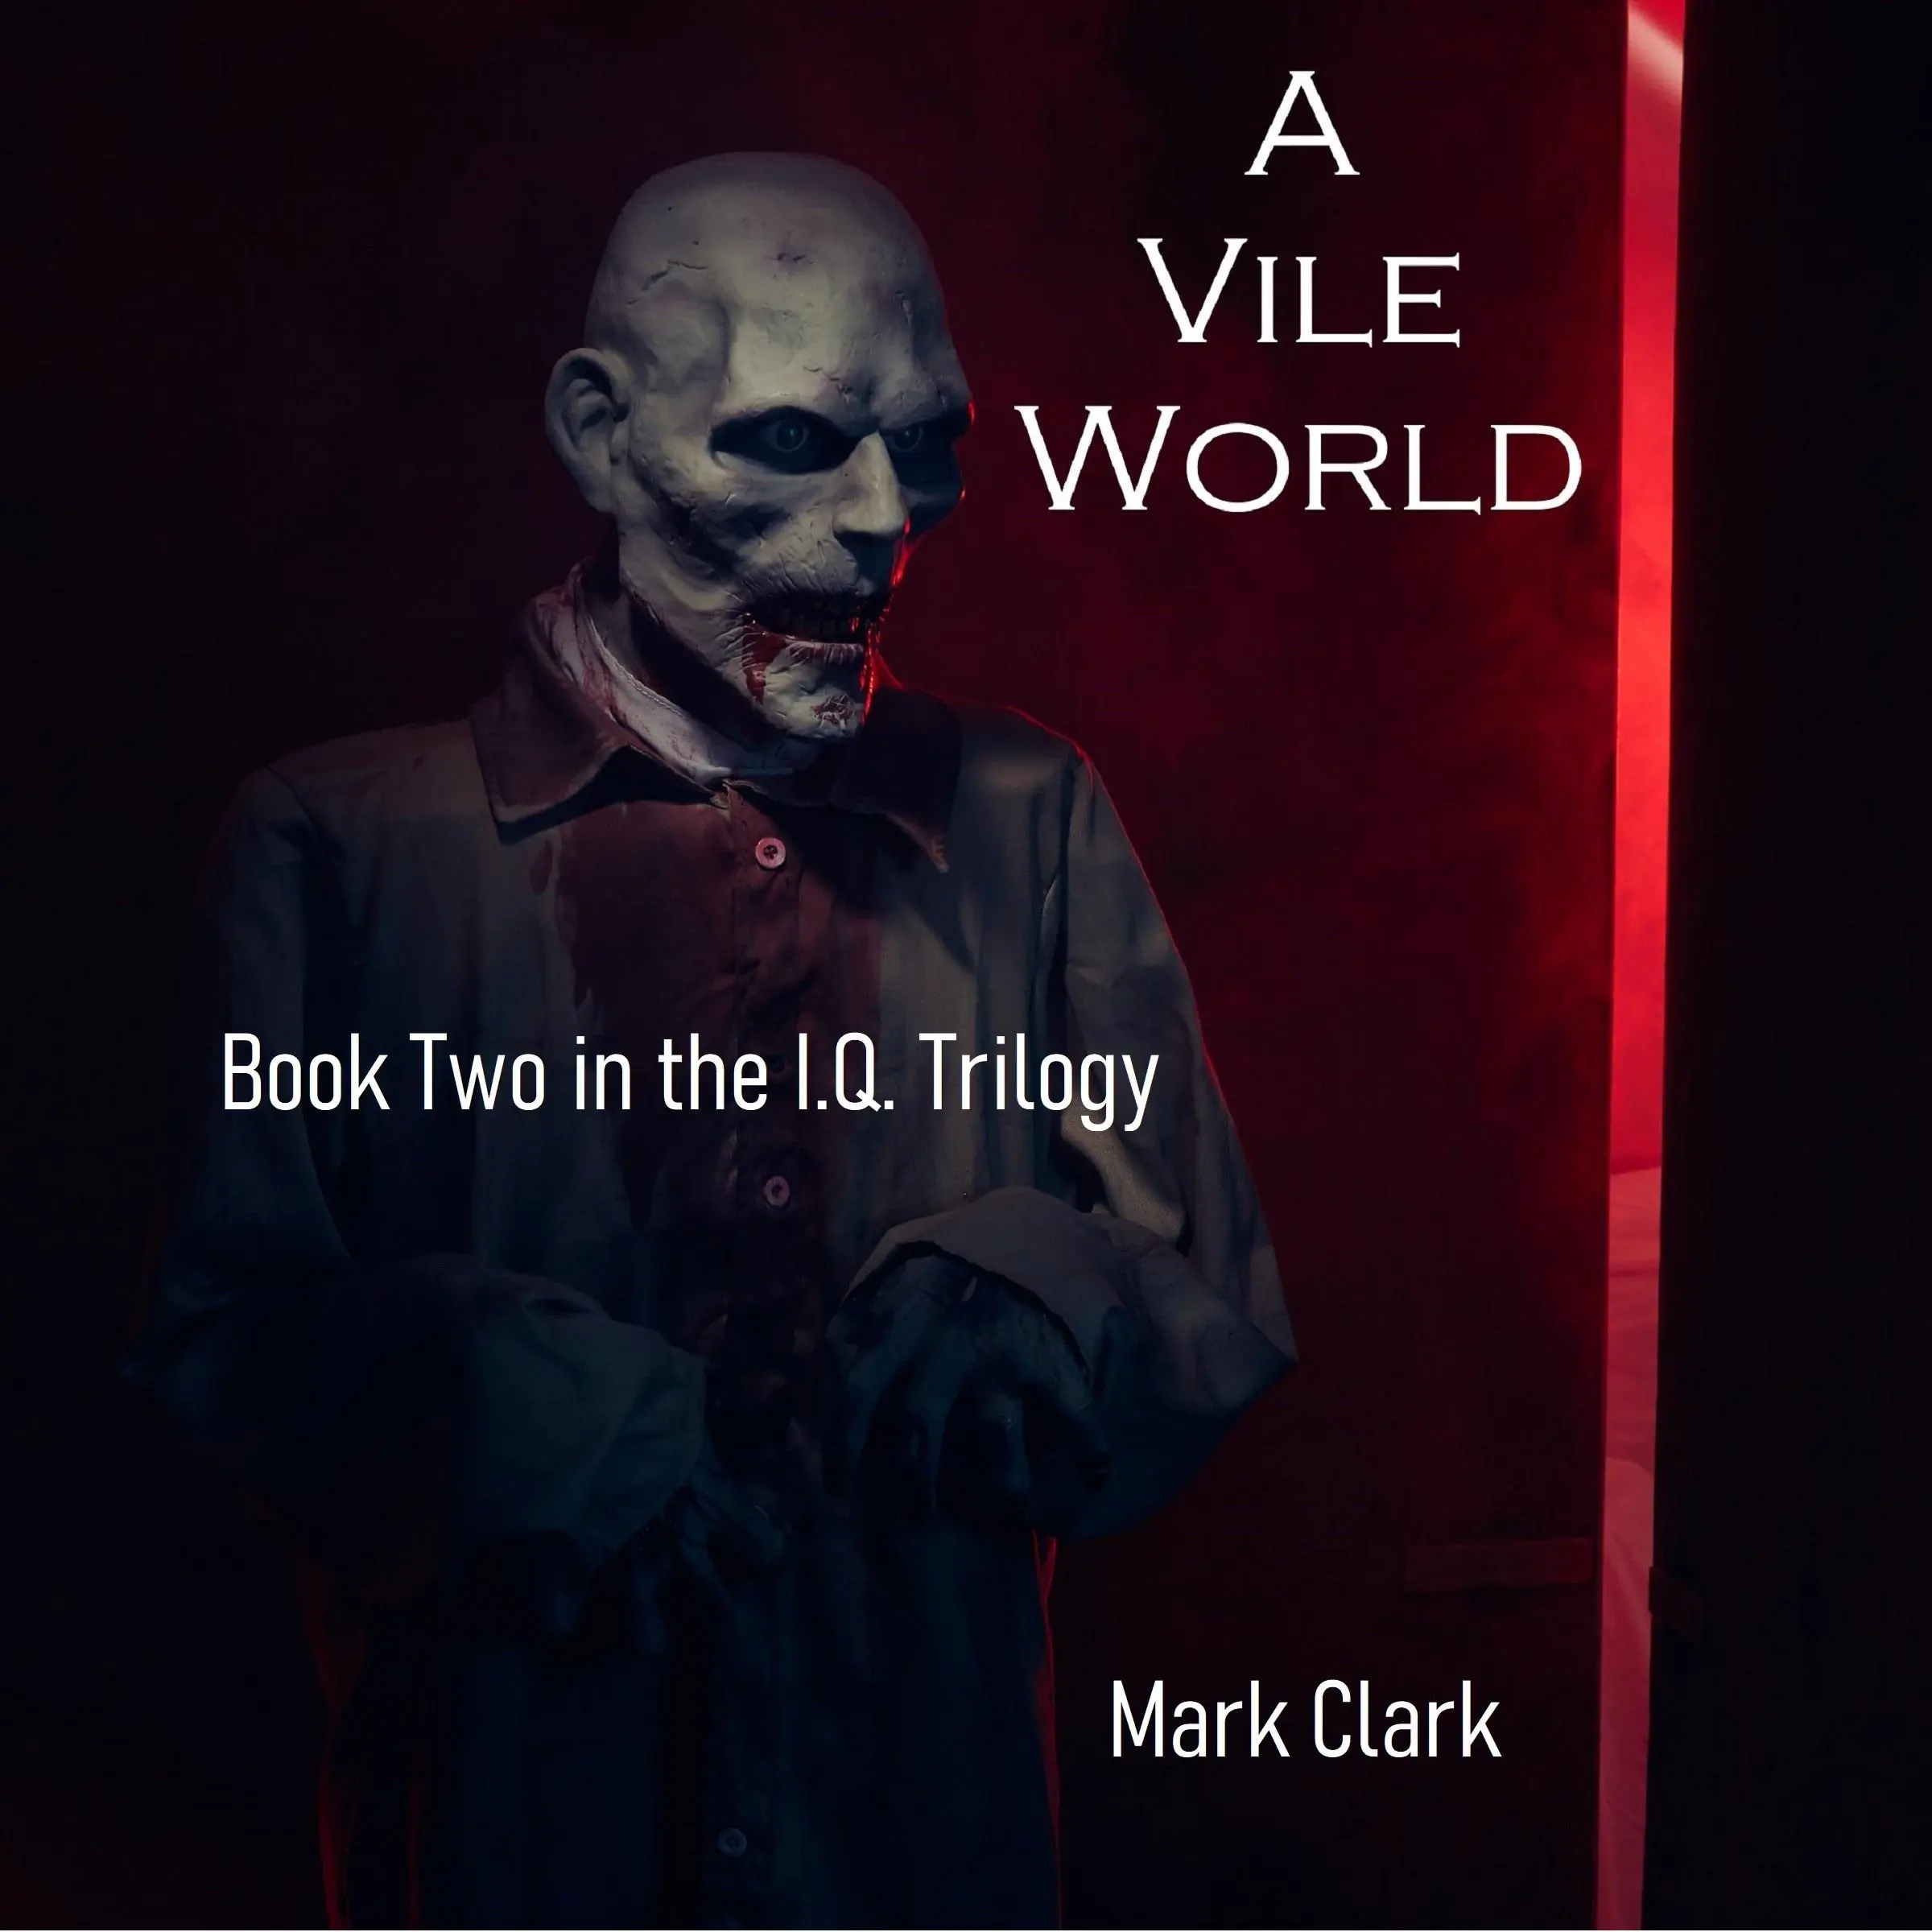 THE I.Q. TRILOGY BOOK 2 - A VILE WORLD by Mark Clark Audiobook